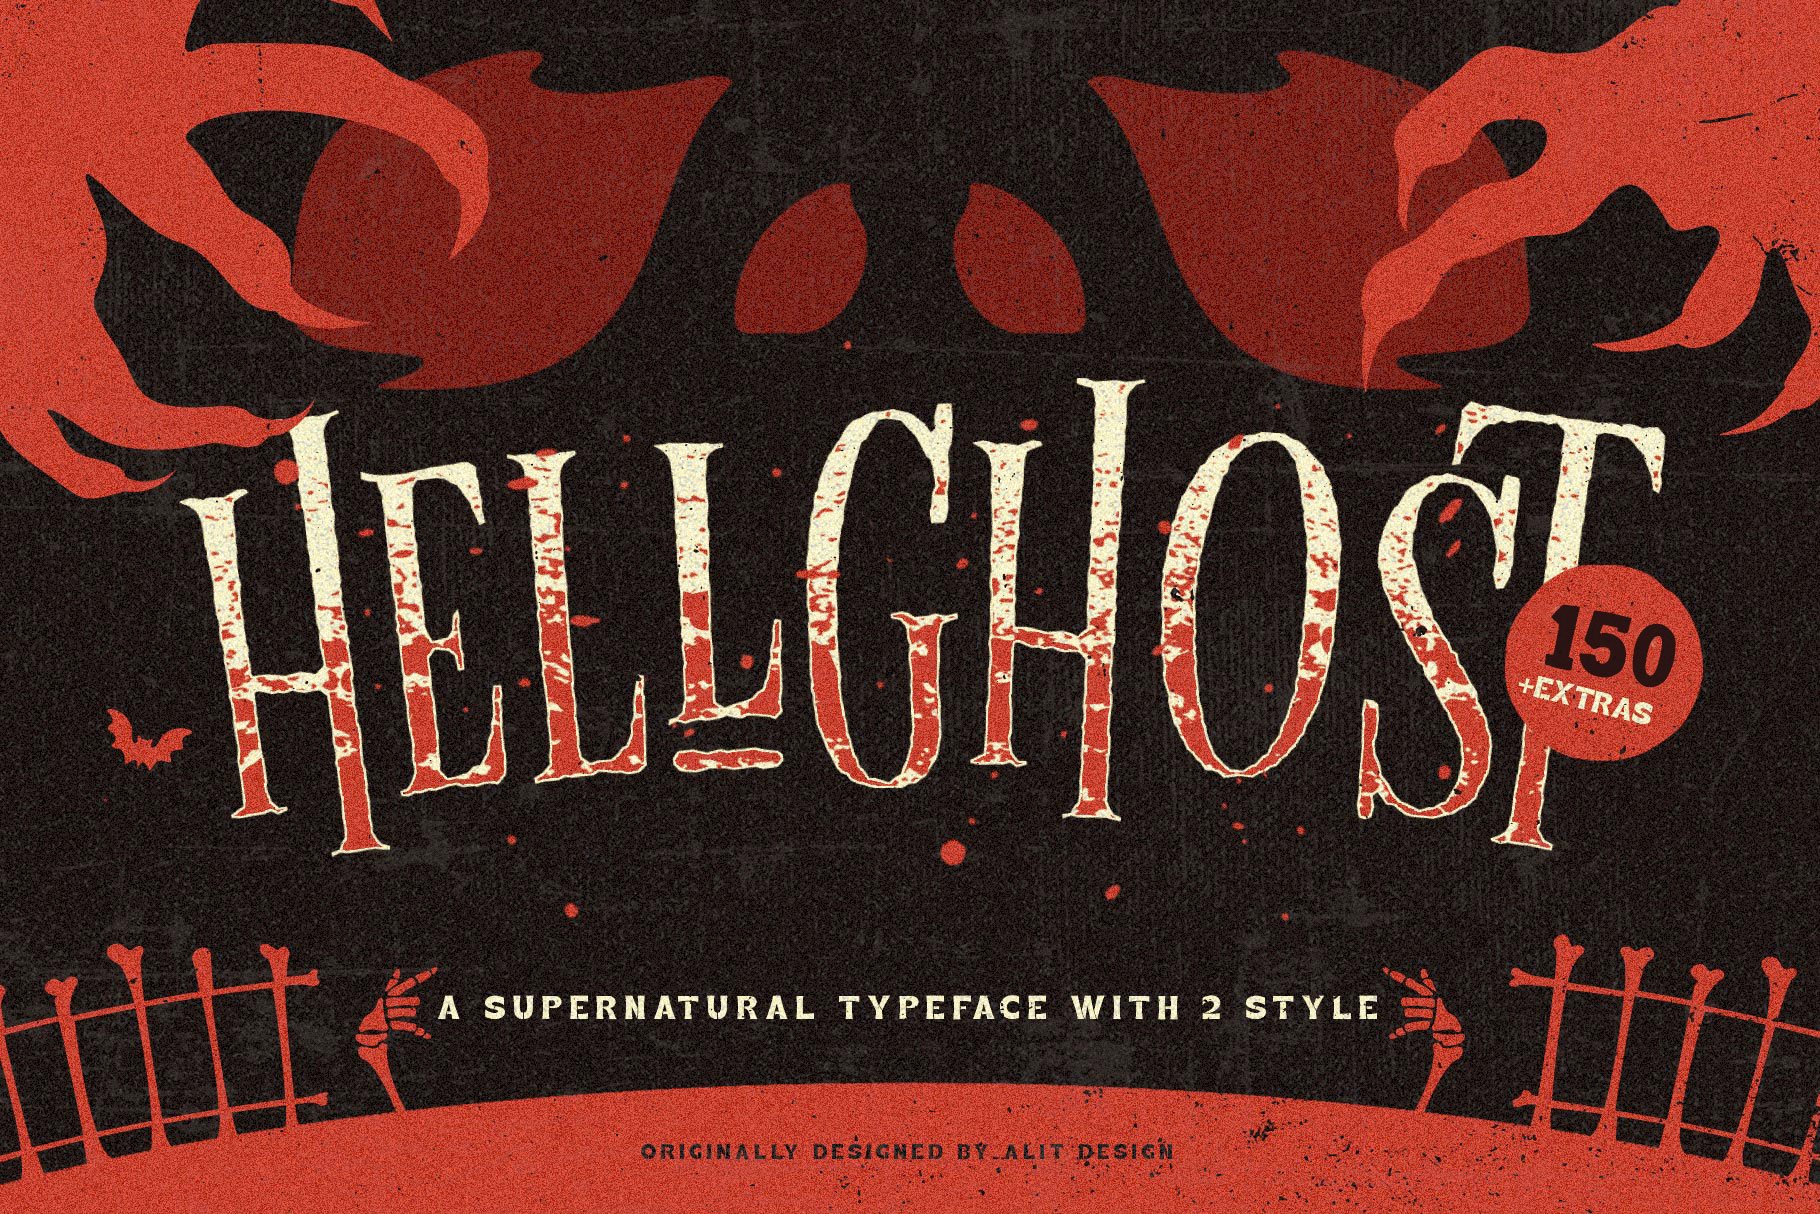 Hellghost Typeface cover image.